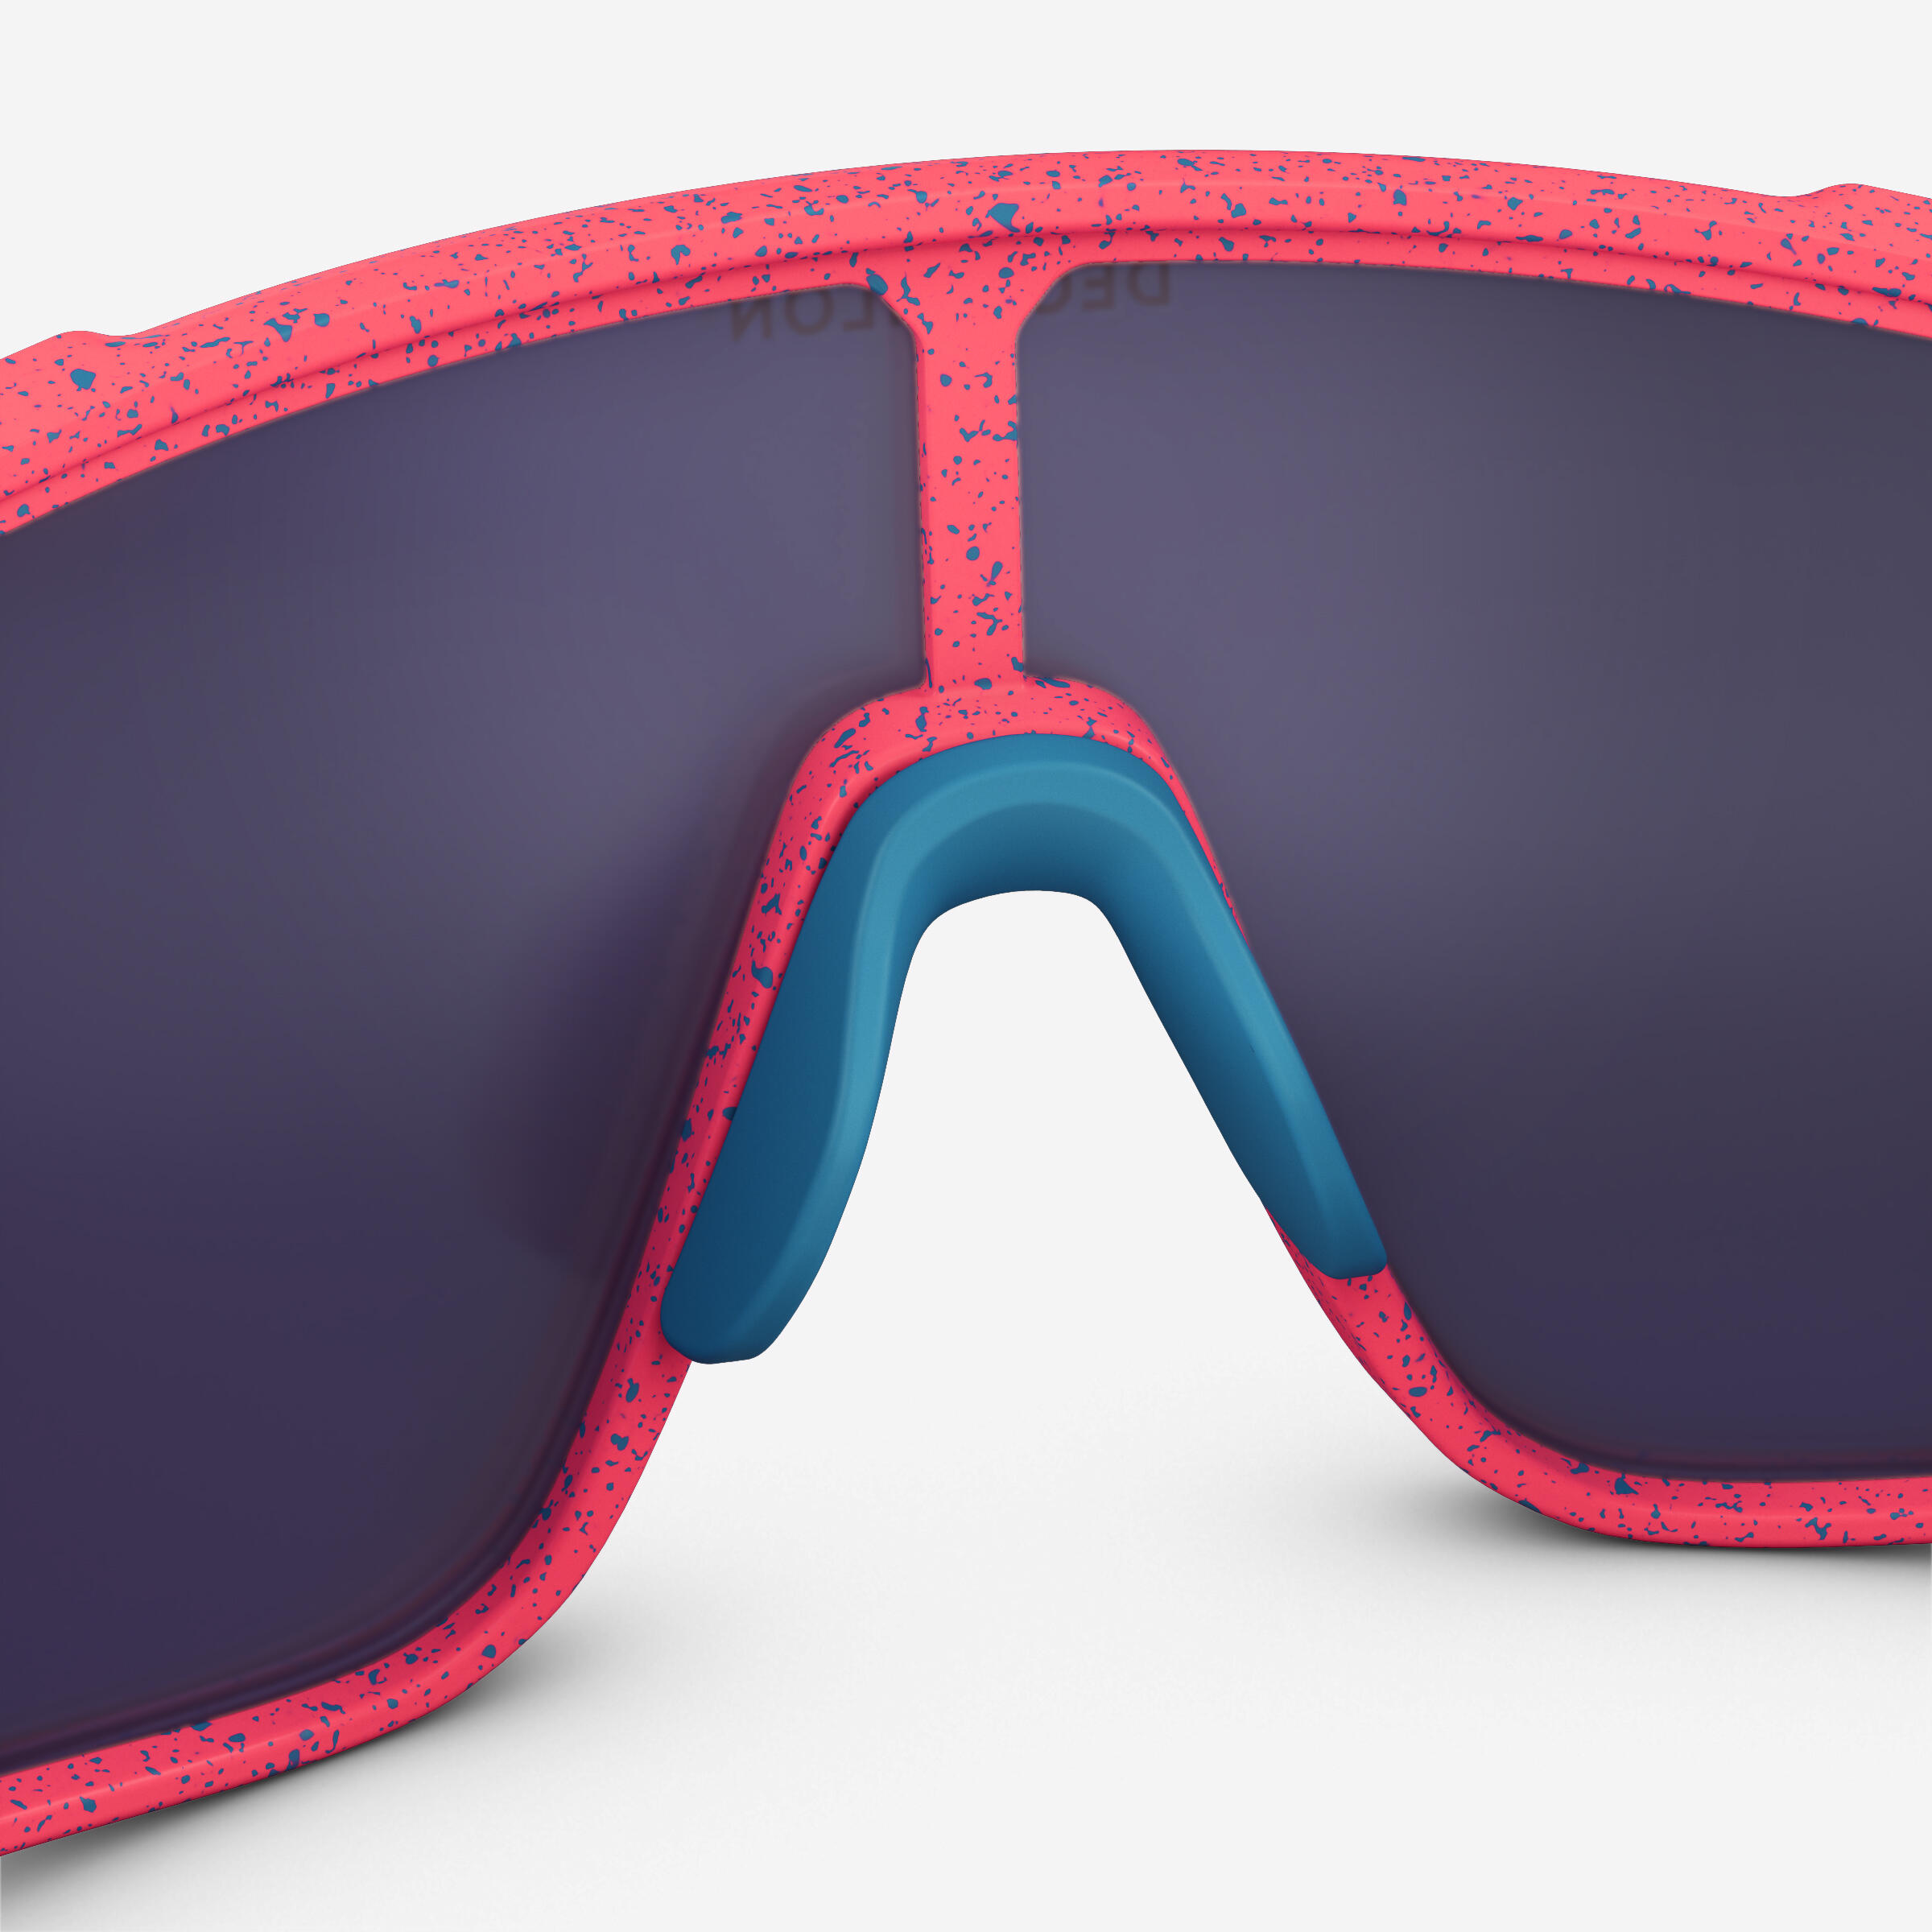 SUNGLASSES MH900 Category 4 Full LENS High Definition - Pink 2/9